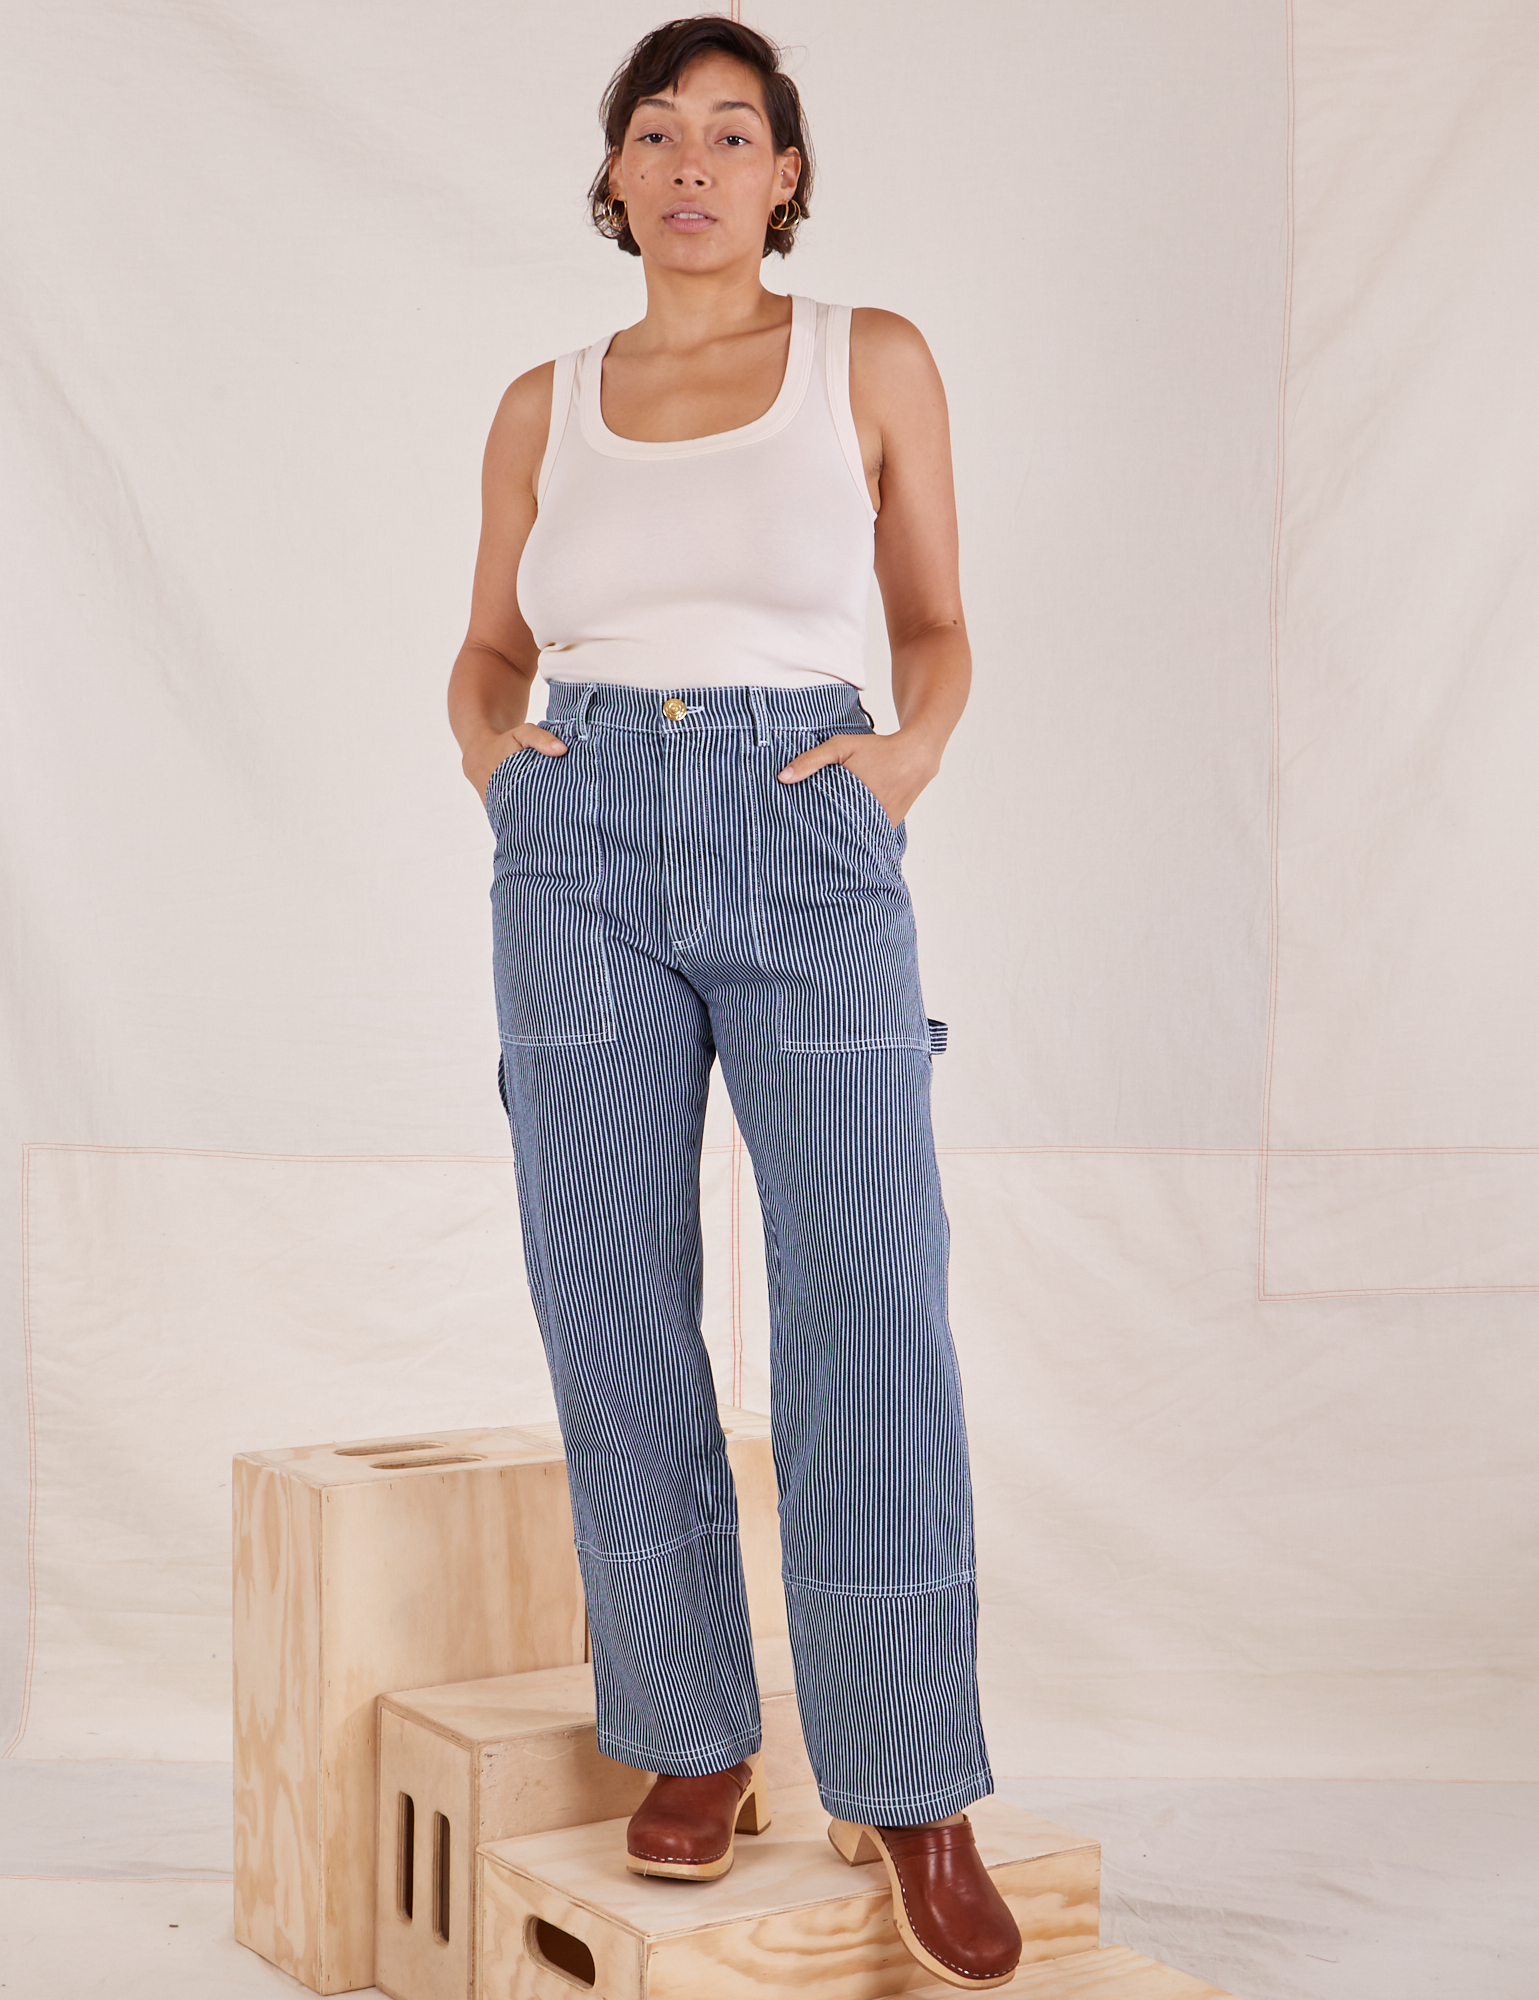 Tiara is 5'4" and wearing S Carpenter Jeans in Railroad Stripes paired with a vintage off-white Tank Top